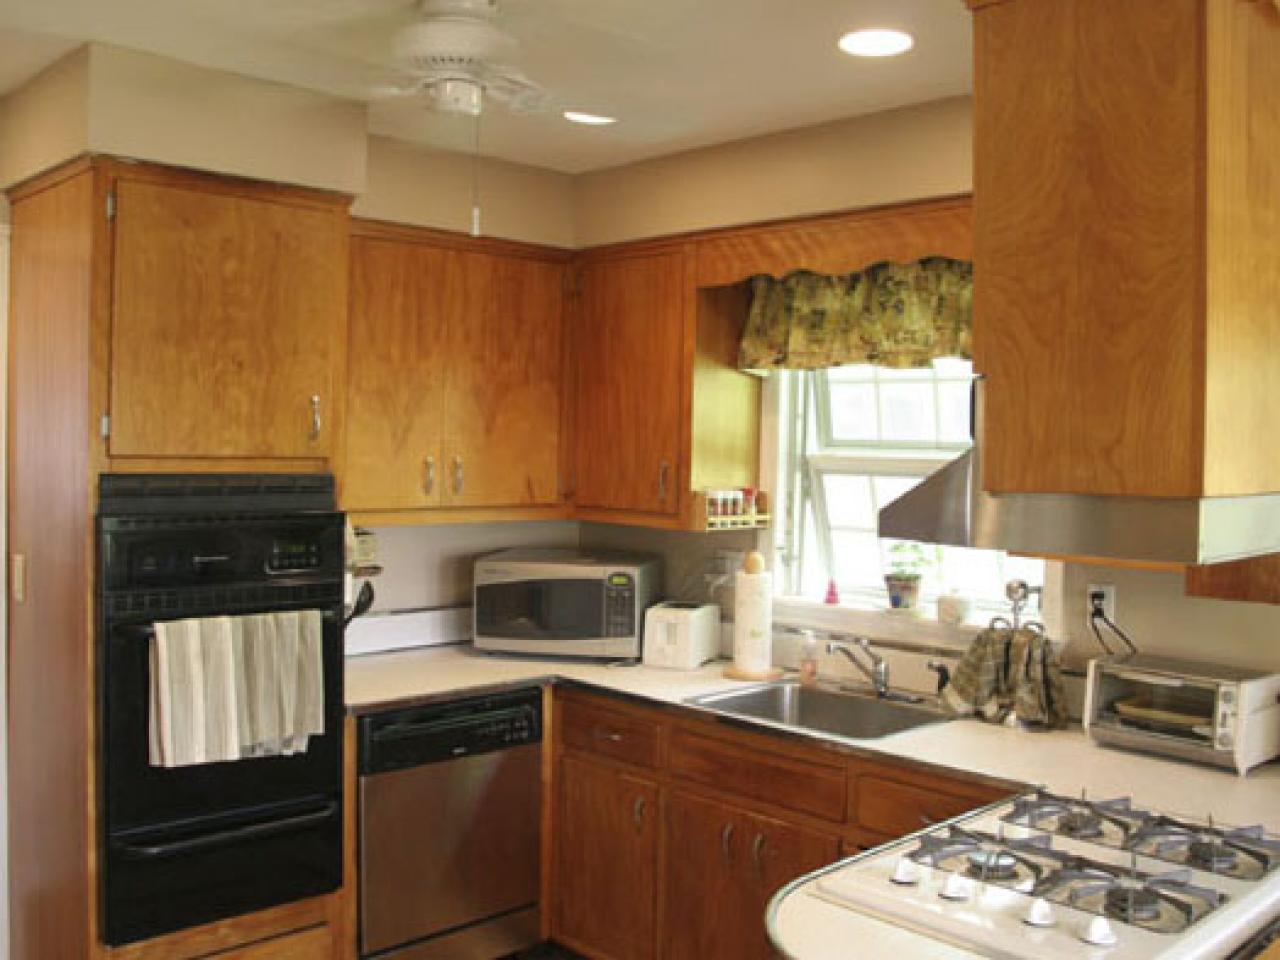 Kitchen Cabinets A Makeover, How To Paint Stained Birch Cabinets